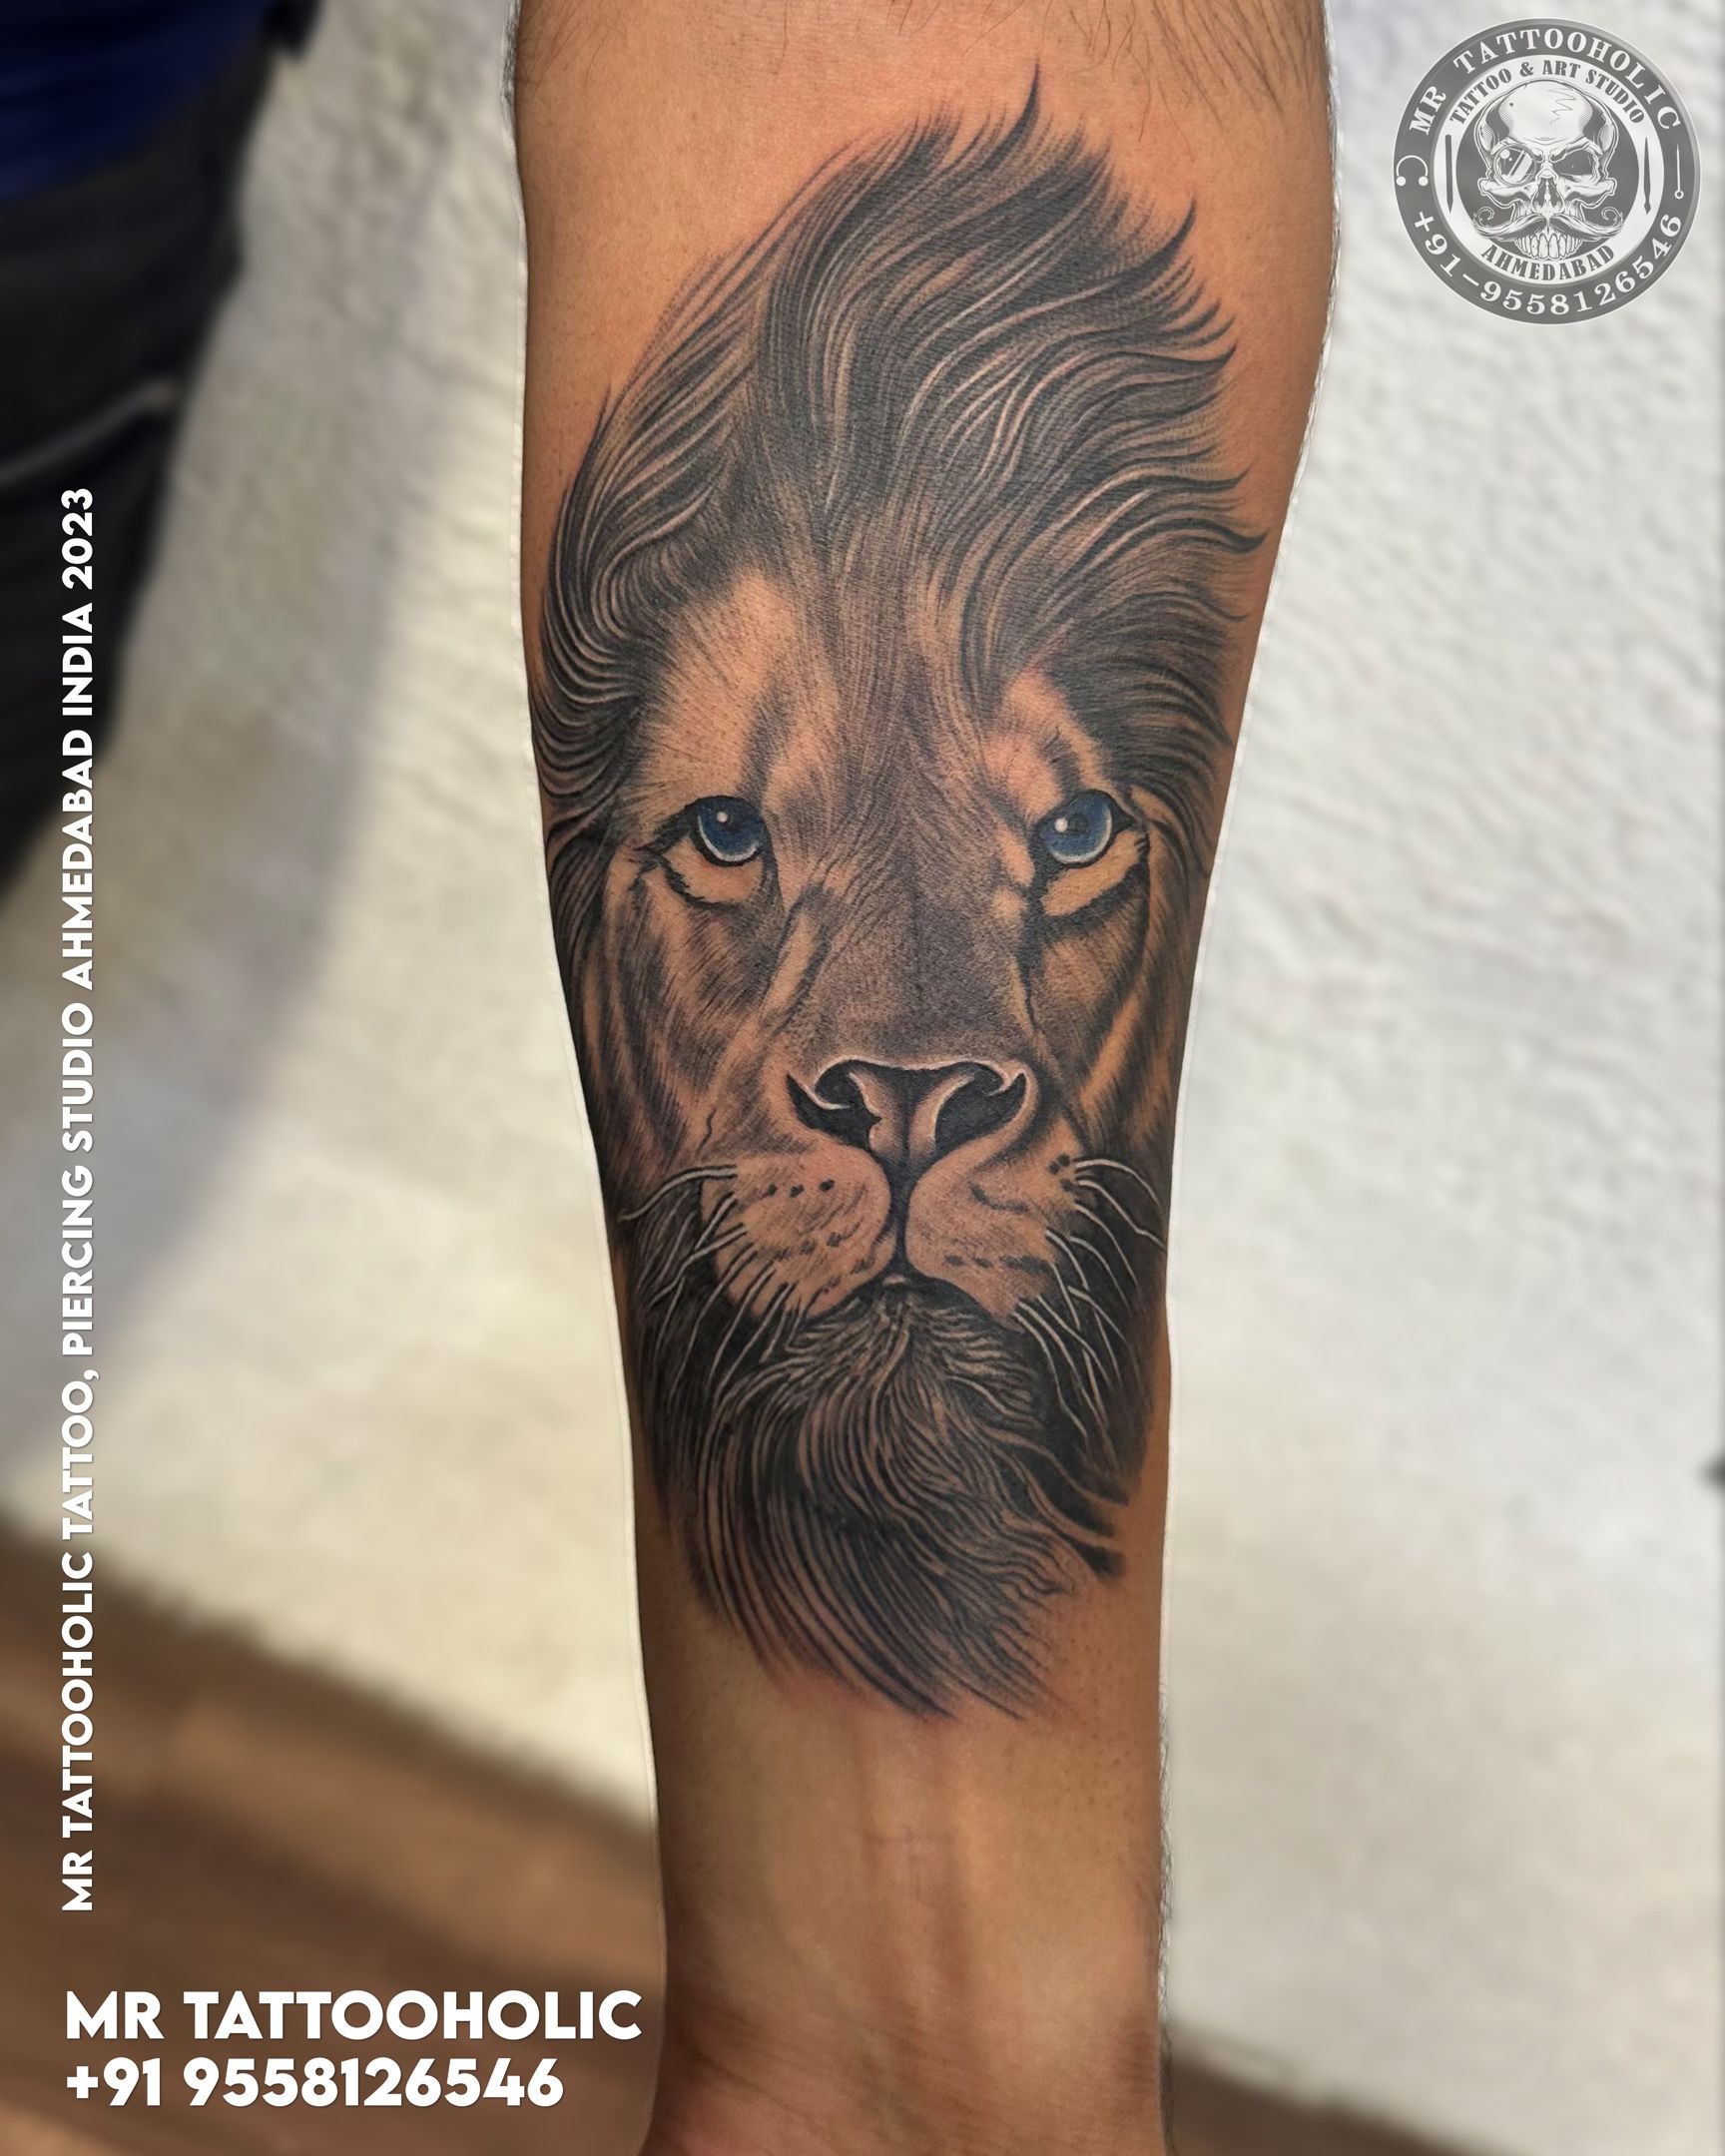 6653 Tattoo Tribal Lion Images Stock Photos  Vectors  Shutterstock